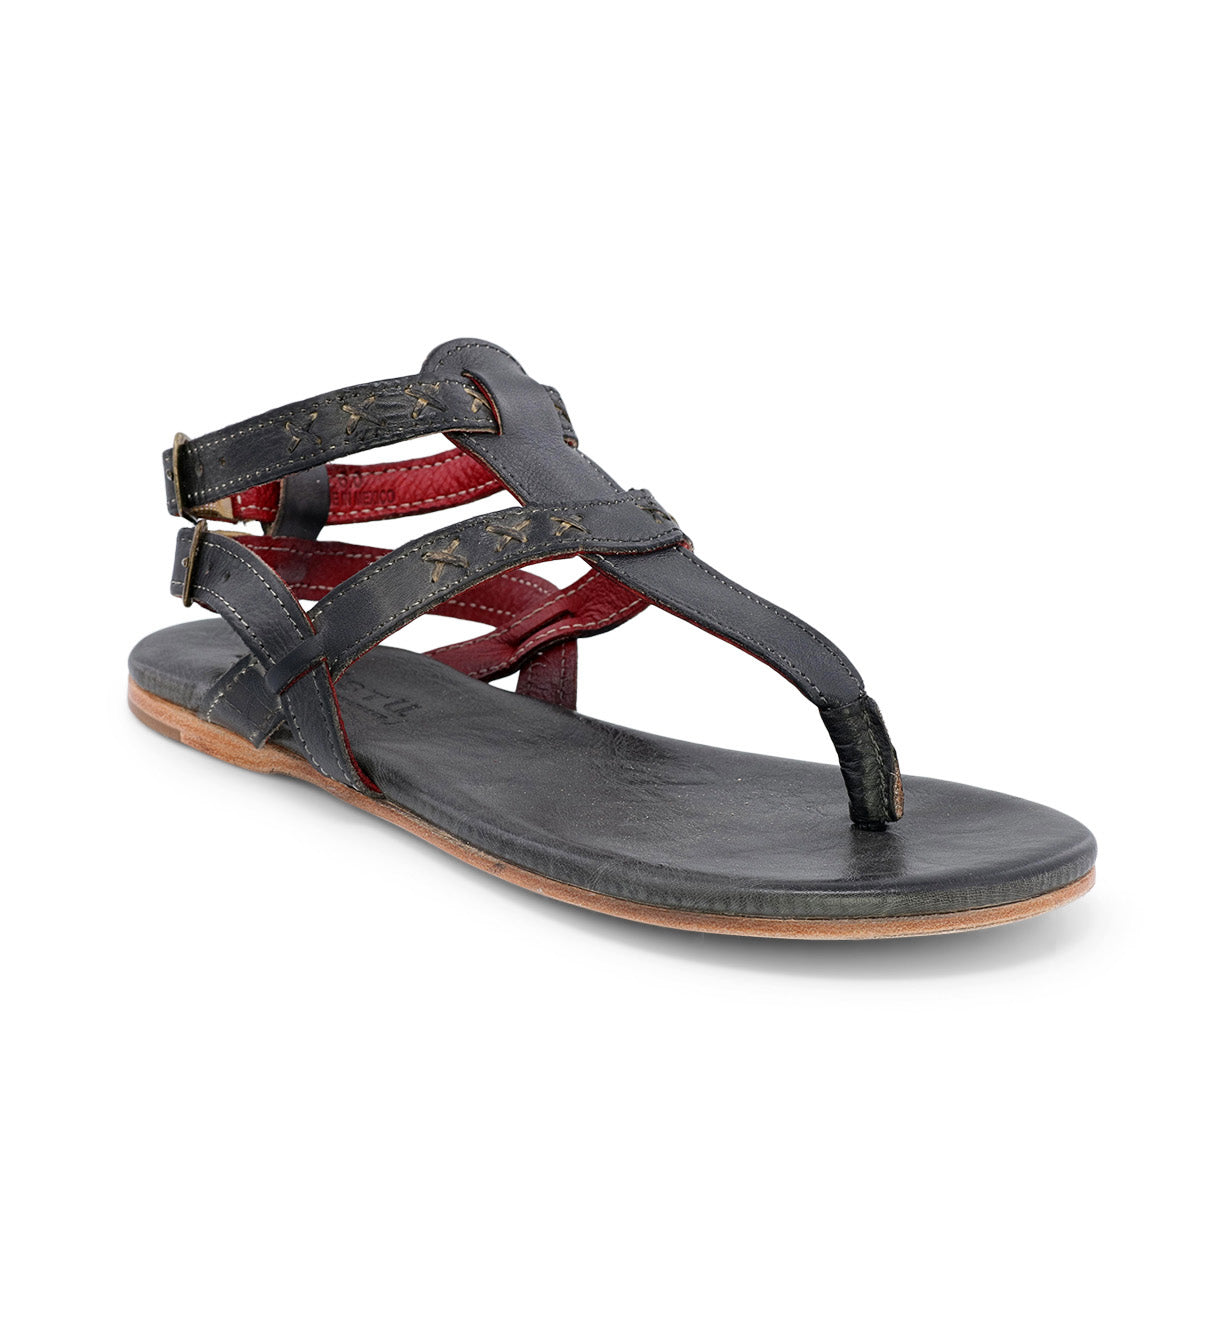 A women's Bed Stu Moon black leather sandal with red straps.